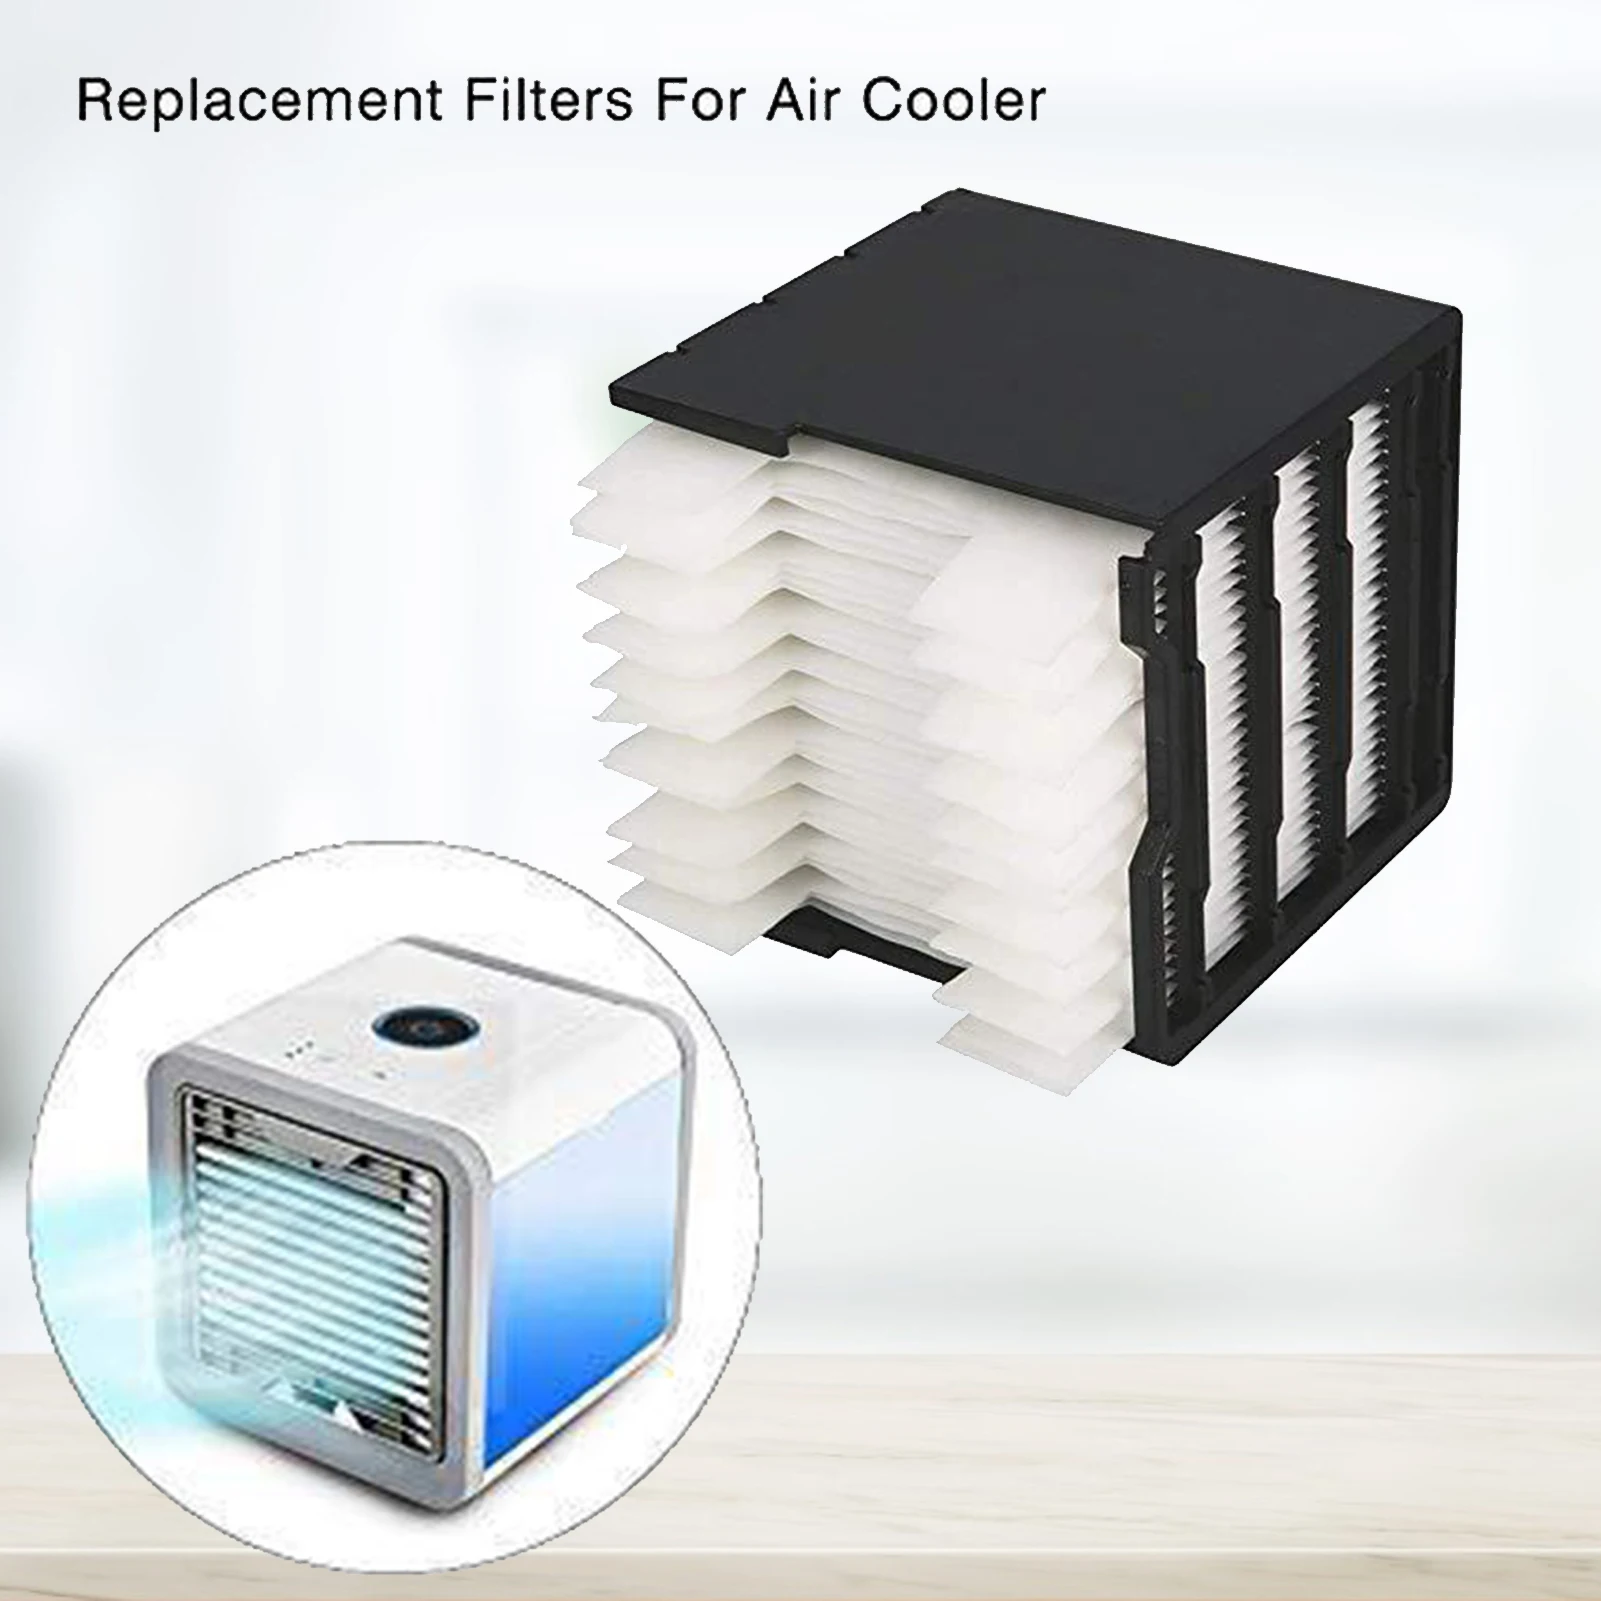 2Pcs for Arctic Air Personal Space Cooler Replacement Filte Space Cooler Replace， AccessoriesFilter for 2019 Version Portable Mini Air Conditioner Air Purifier & Humidifie Air Cooler Filter White 